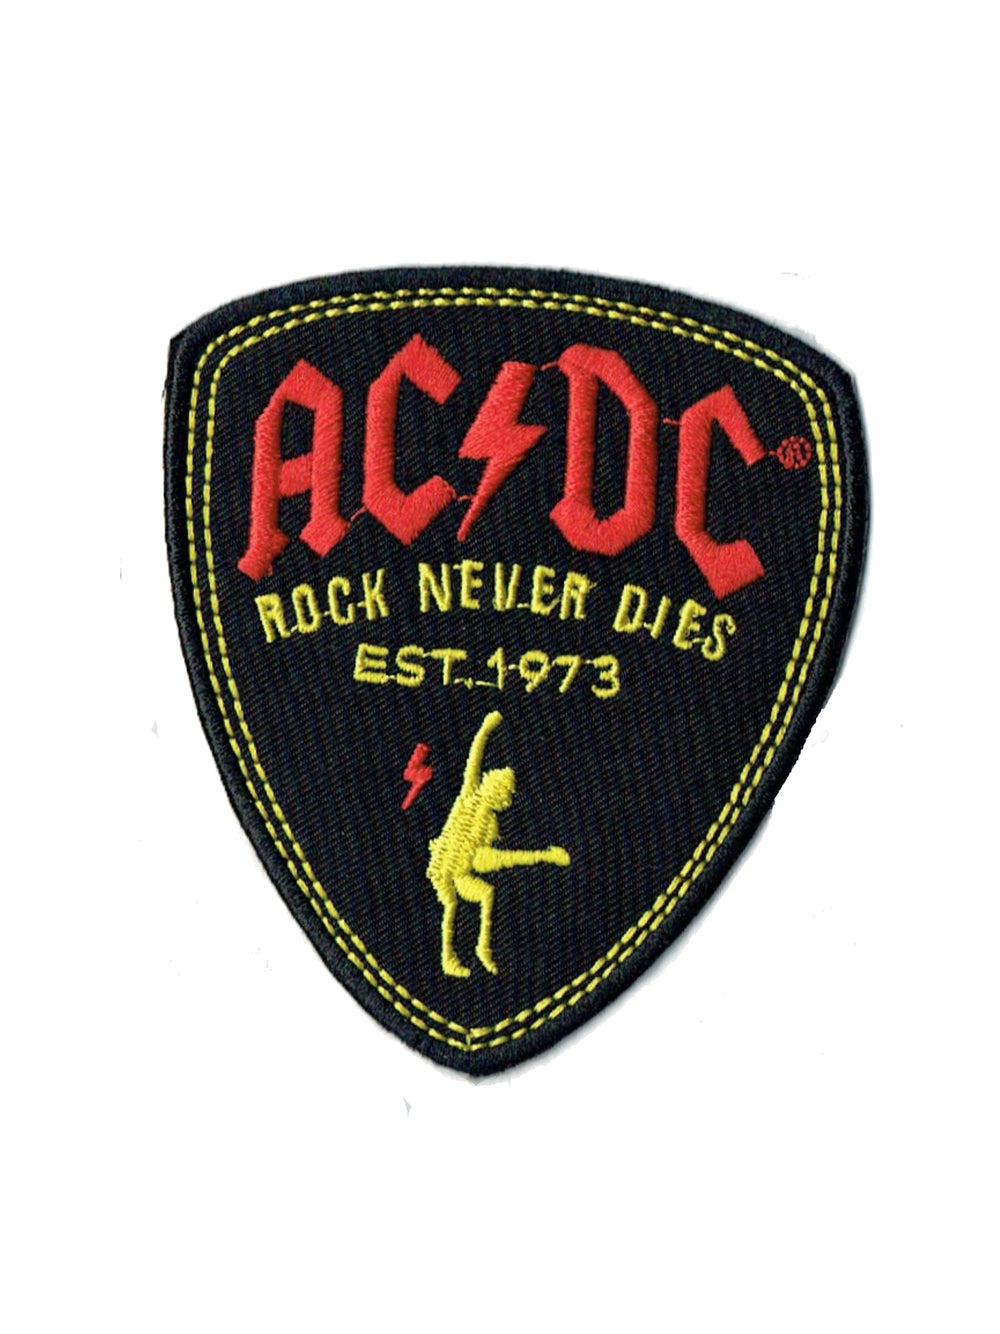 AC/DC Rock Never Dies Plectrum Shaped Official Woven Patch Brand New